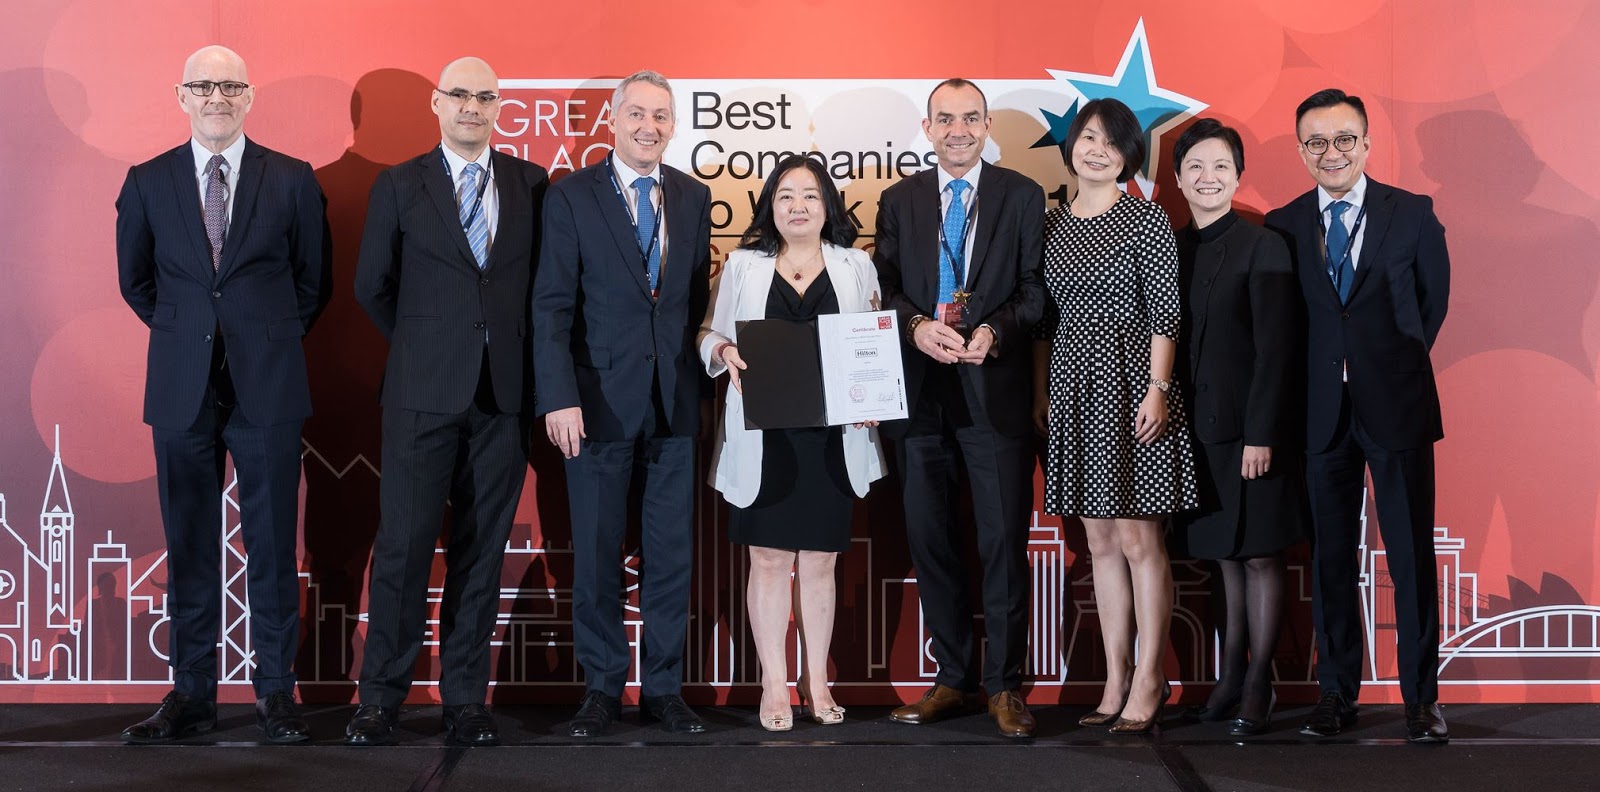 WorkSmart Asia: Hilton is one of the top three hospitality employers in